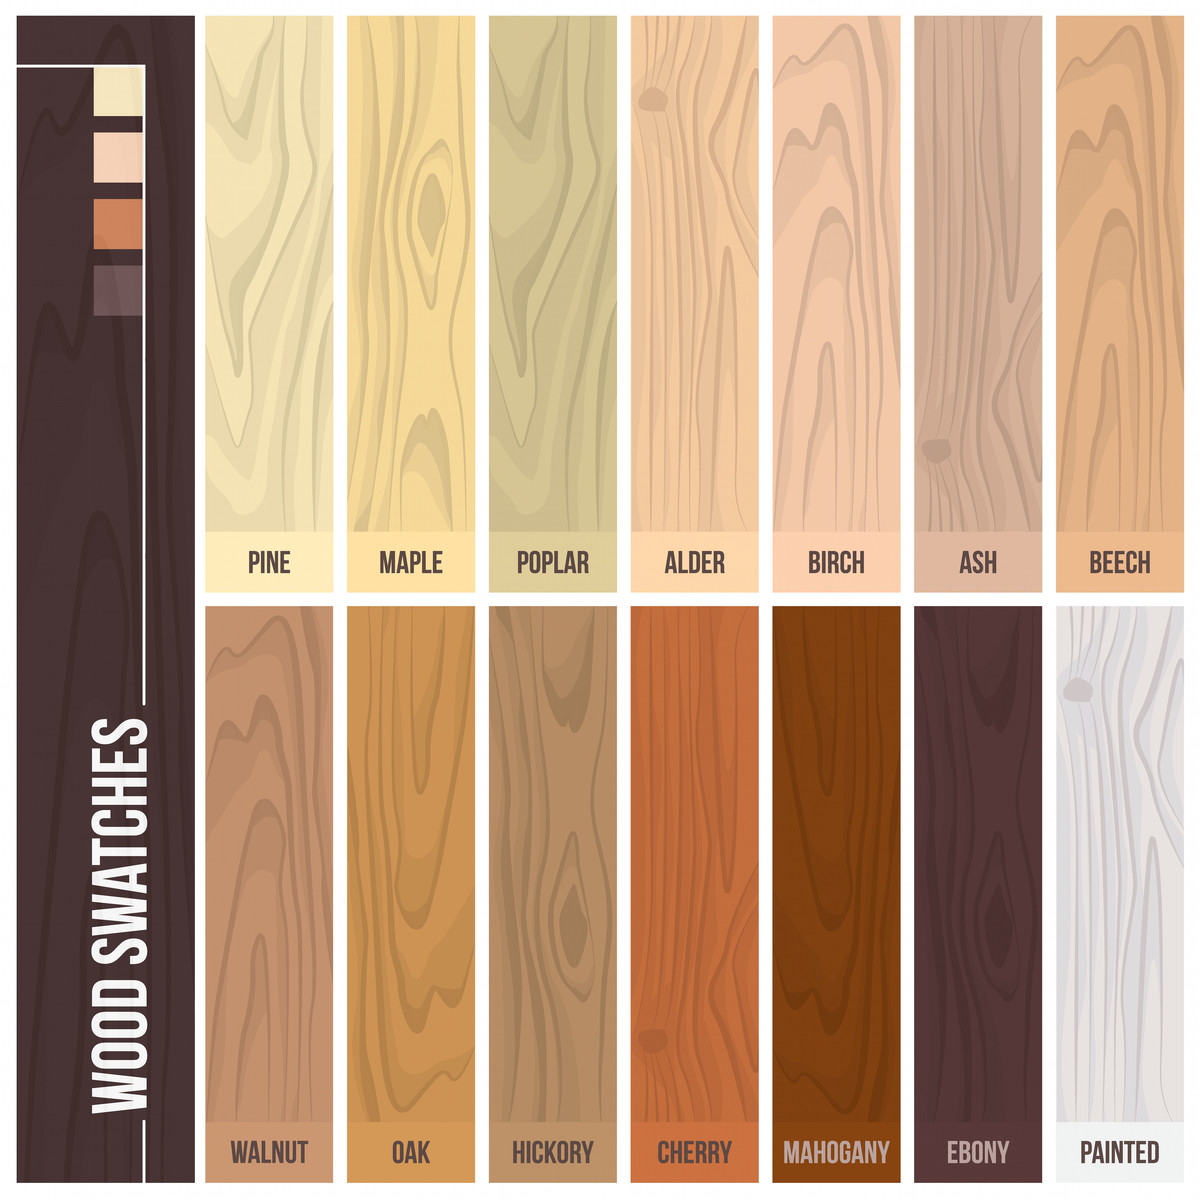 14 Recommended Unfinished Hardwood Flooring Prices 2024 free download unfinished hardwood flooring prices of 12 types of hardwood flooring species styles edging dimensions intended for types of hardwood flooring illustrated guide